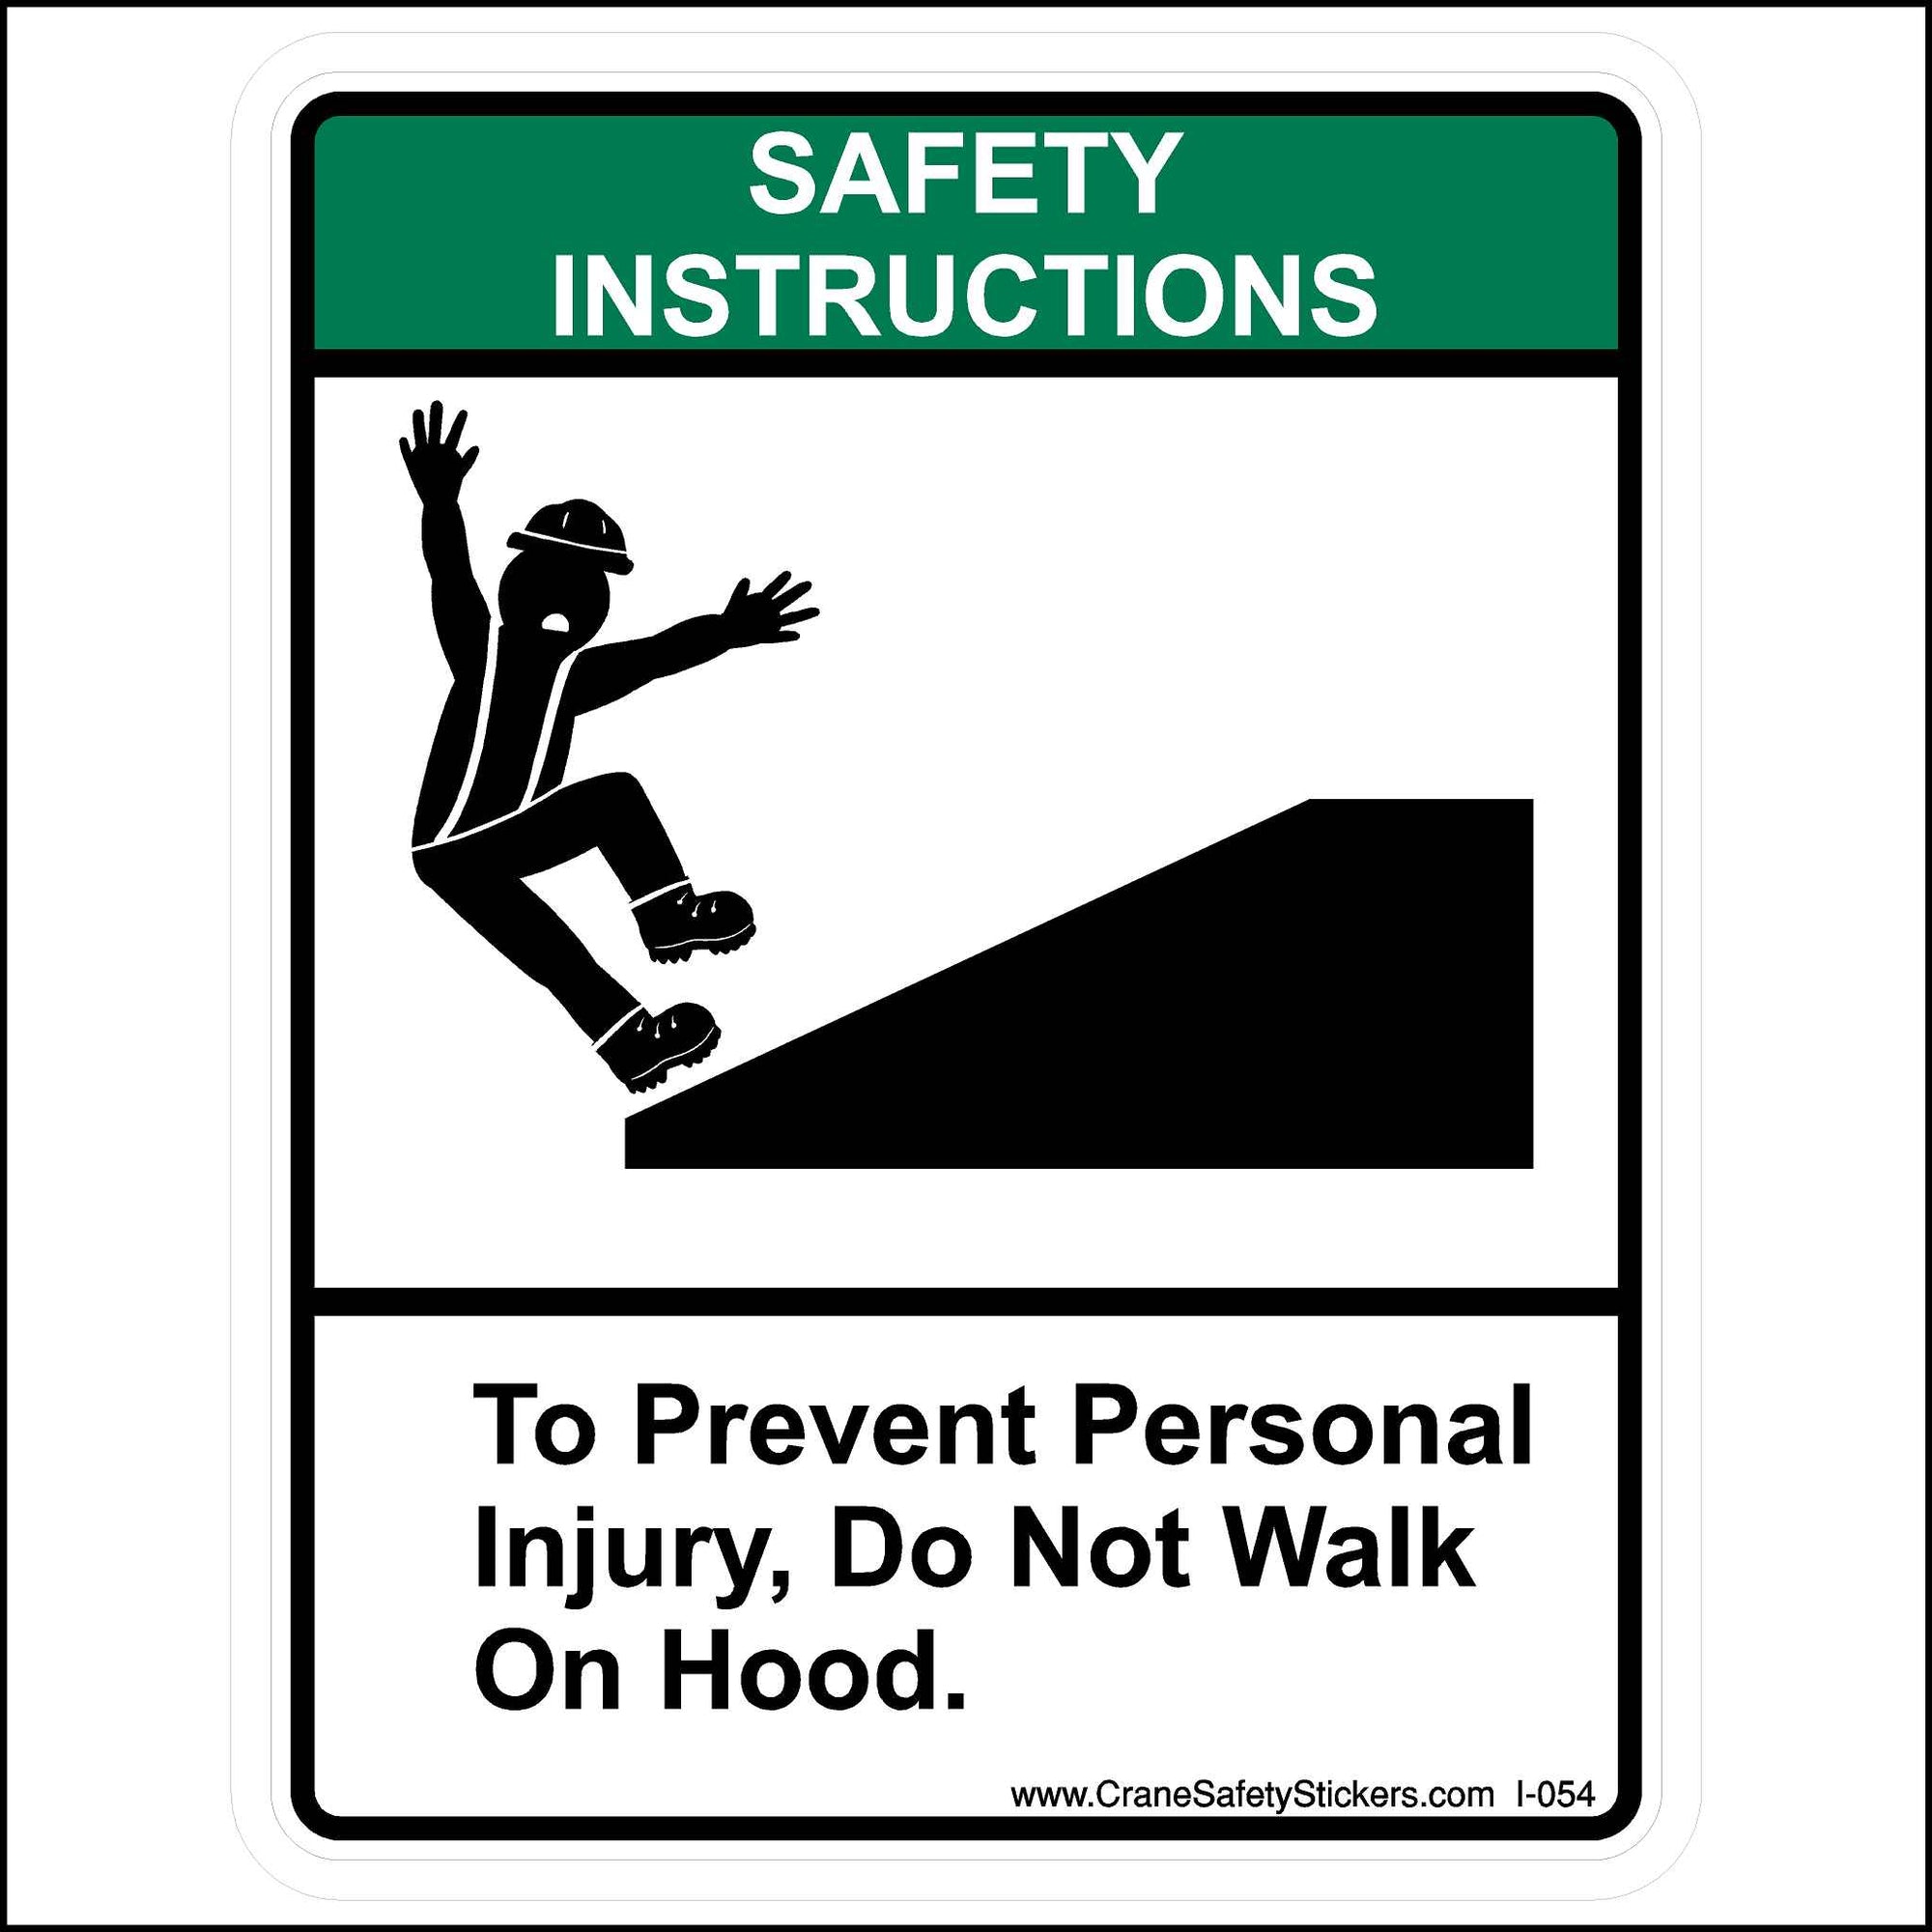 This Safety Instruction Sticker is Printed With. SAFETY INSTRUCTIONS  To Prevent Personal Injury, Do Not Walk On Hood.